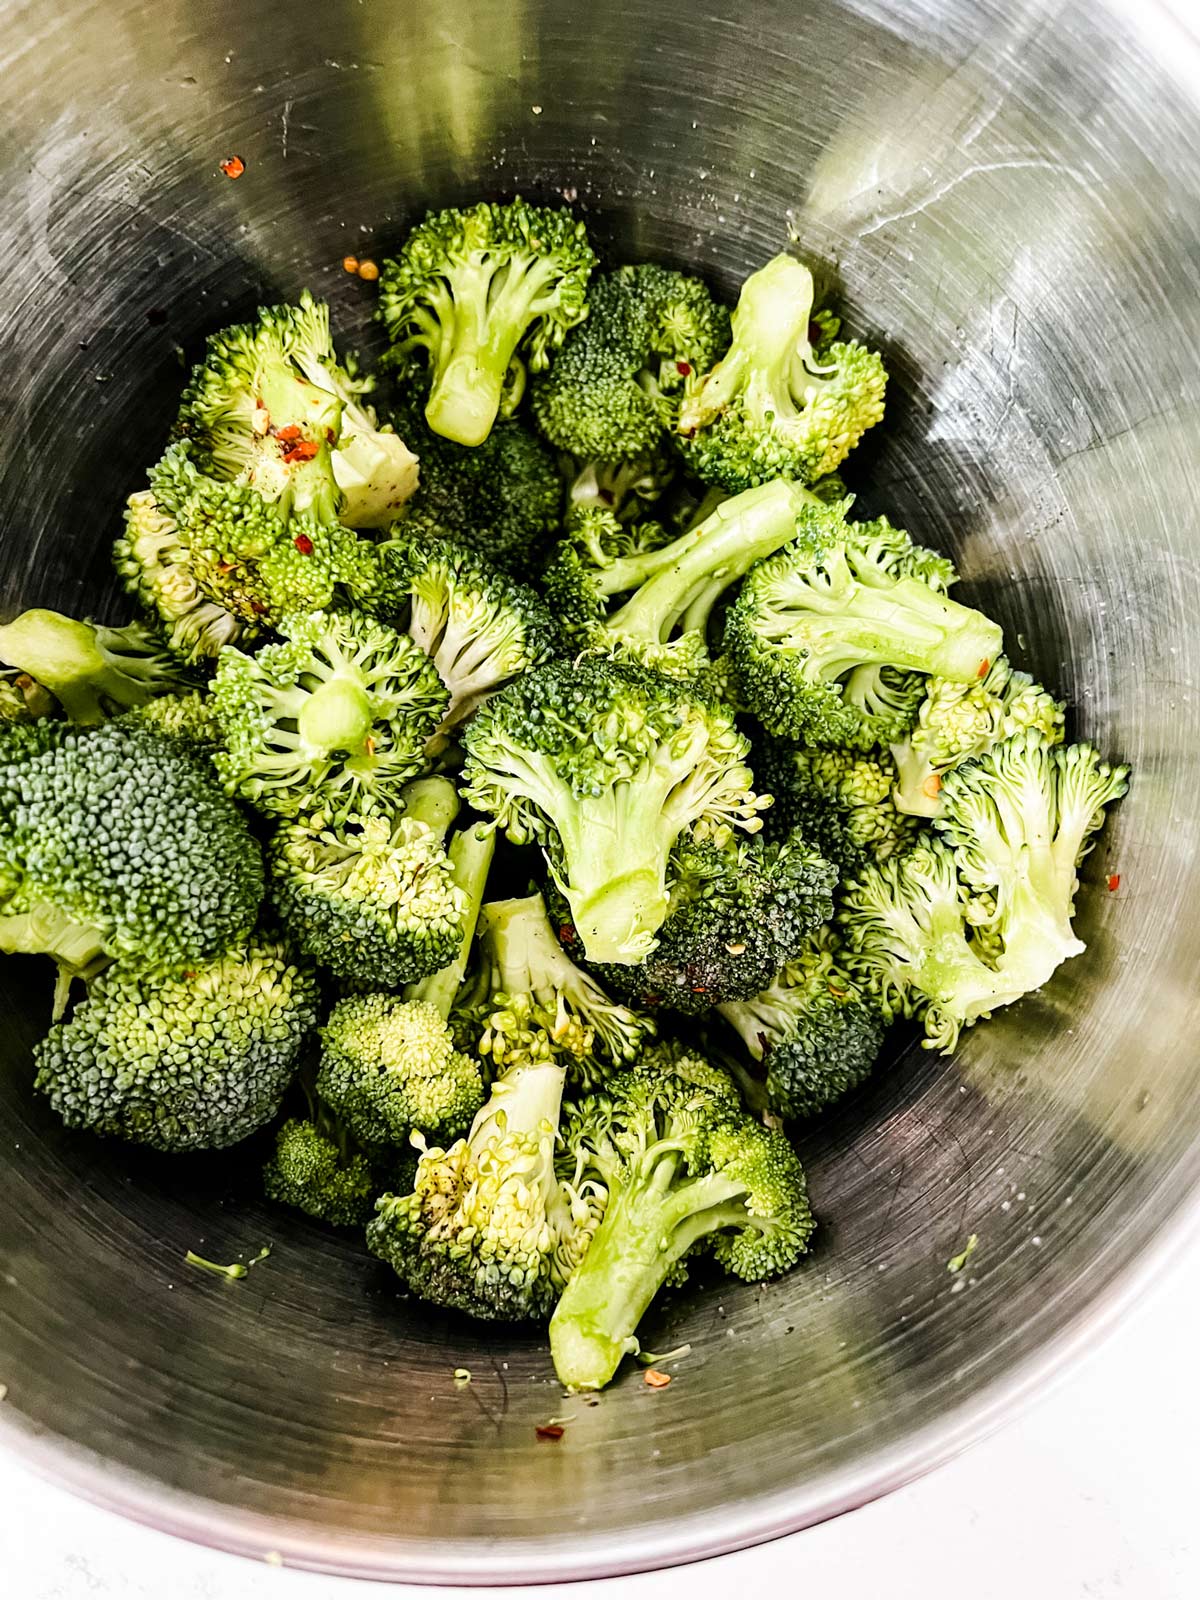 Broccoli florets tossed with seasonings in a bowl.